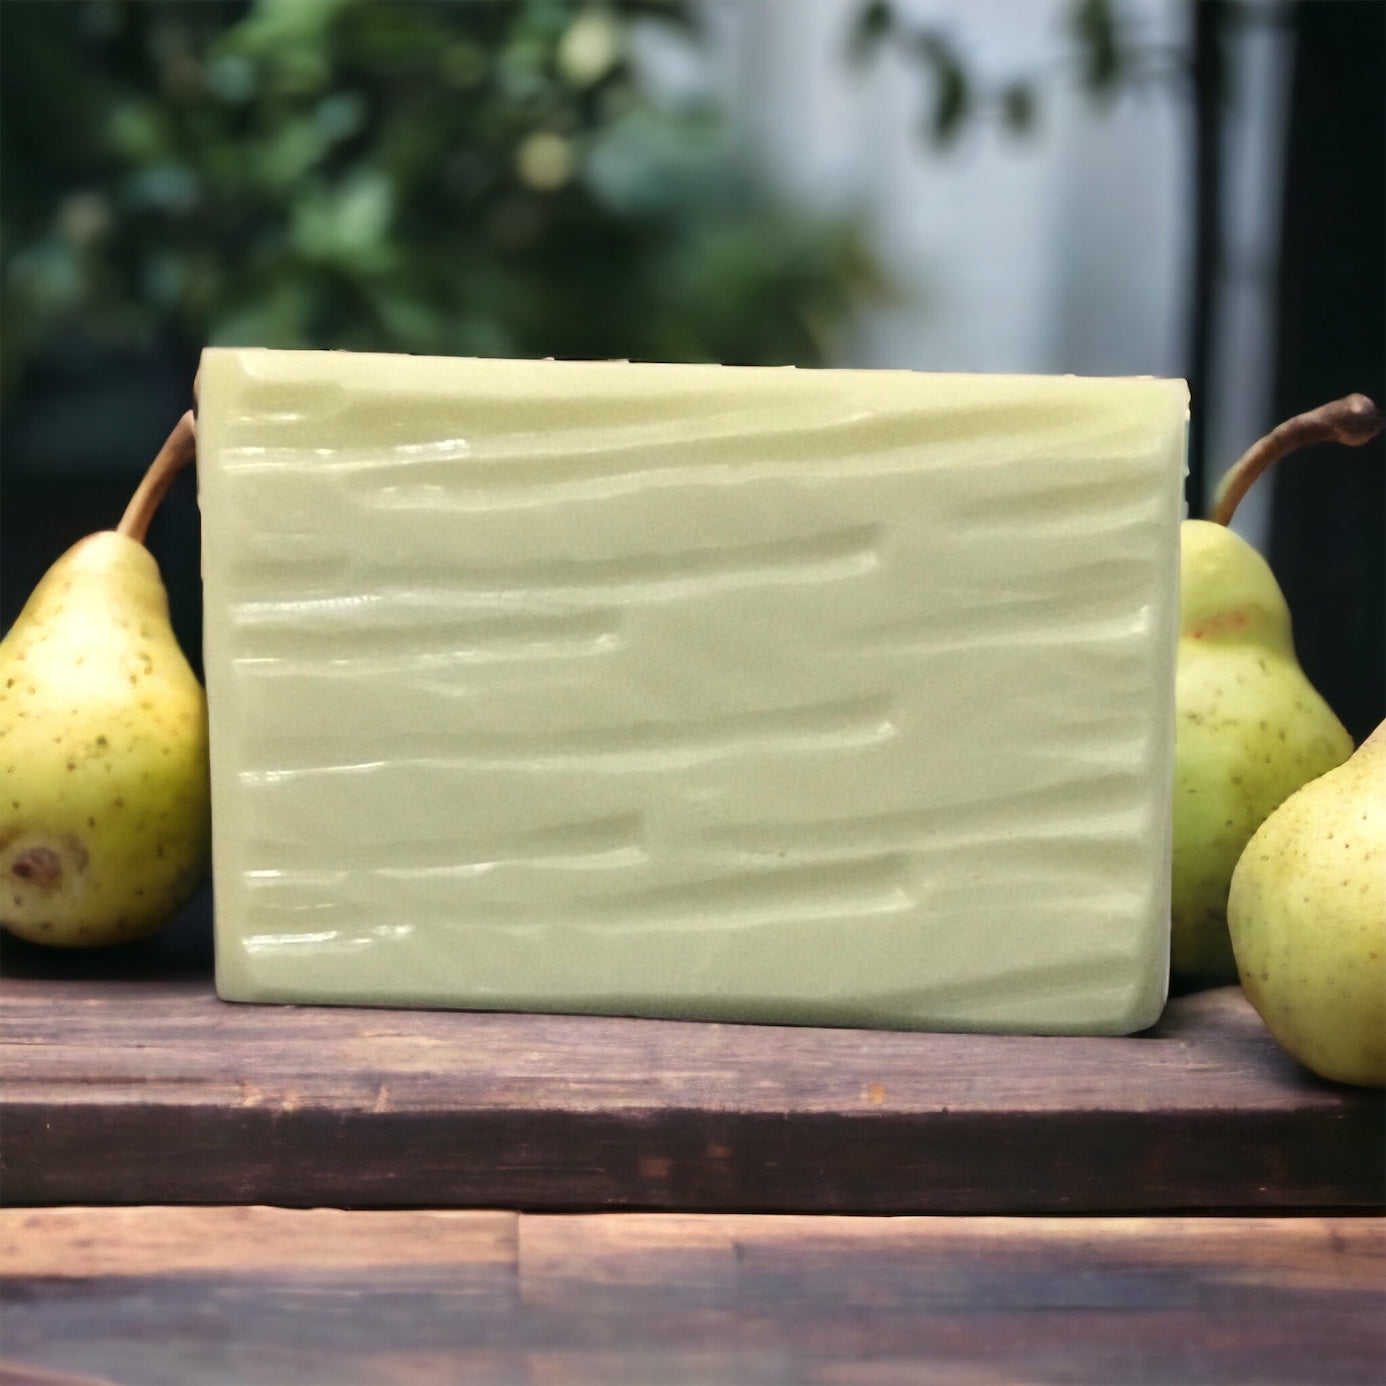 Pale green pear soap on wooden table with pears for display